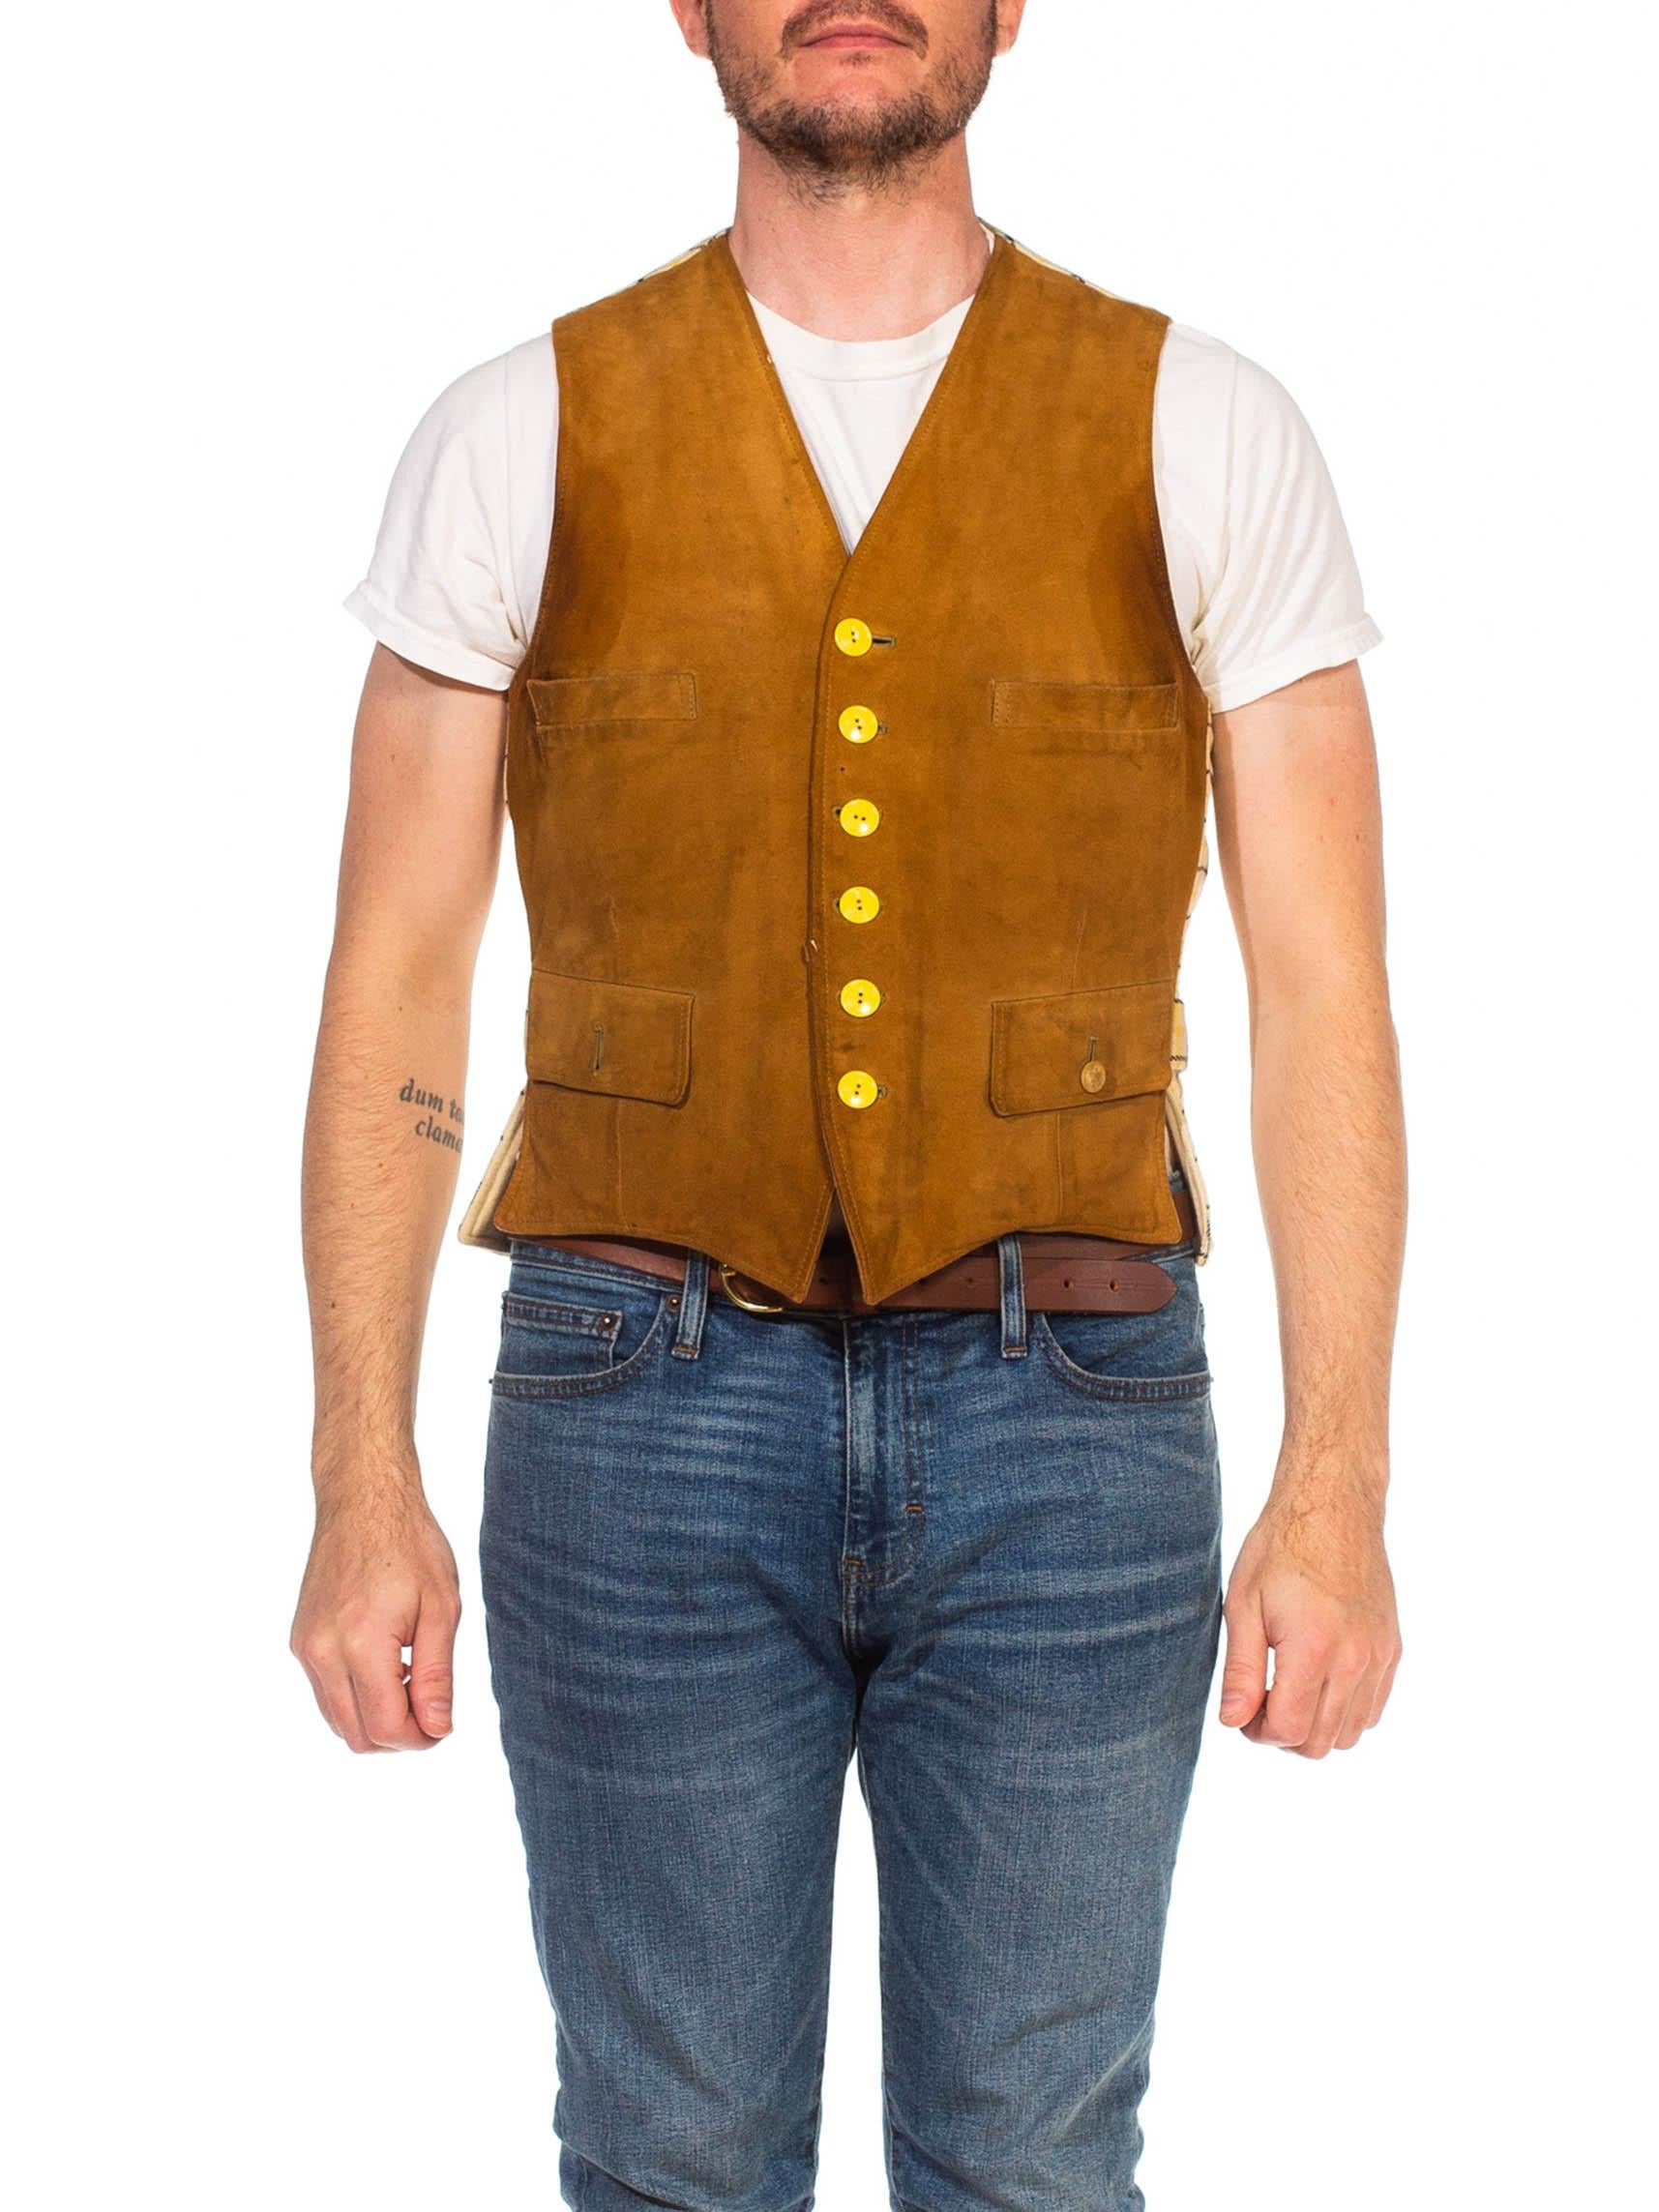 Very old and has signs of patina and age 1930S Caramel Brown Suede & Wool Men's Vest